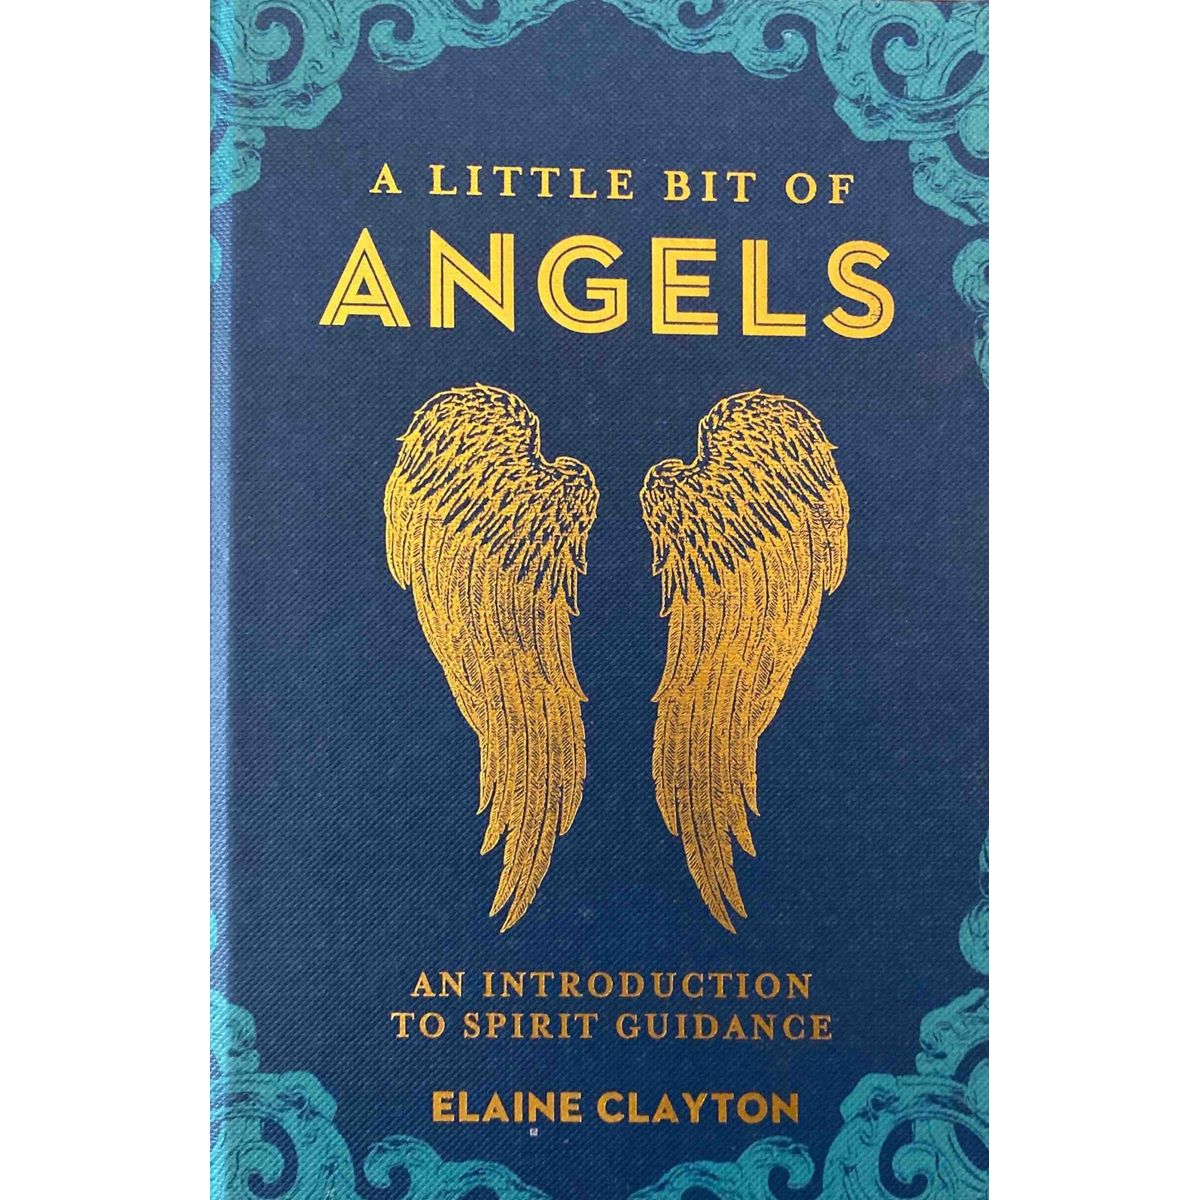 ISBN: 9781454928713 / 1454928719 - A Little Bit of Angels: An Introduction to Spirit Guidance by Elaine Clayton [2018]